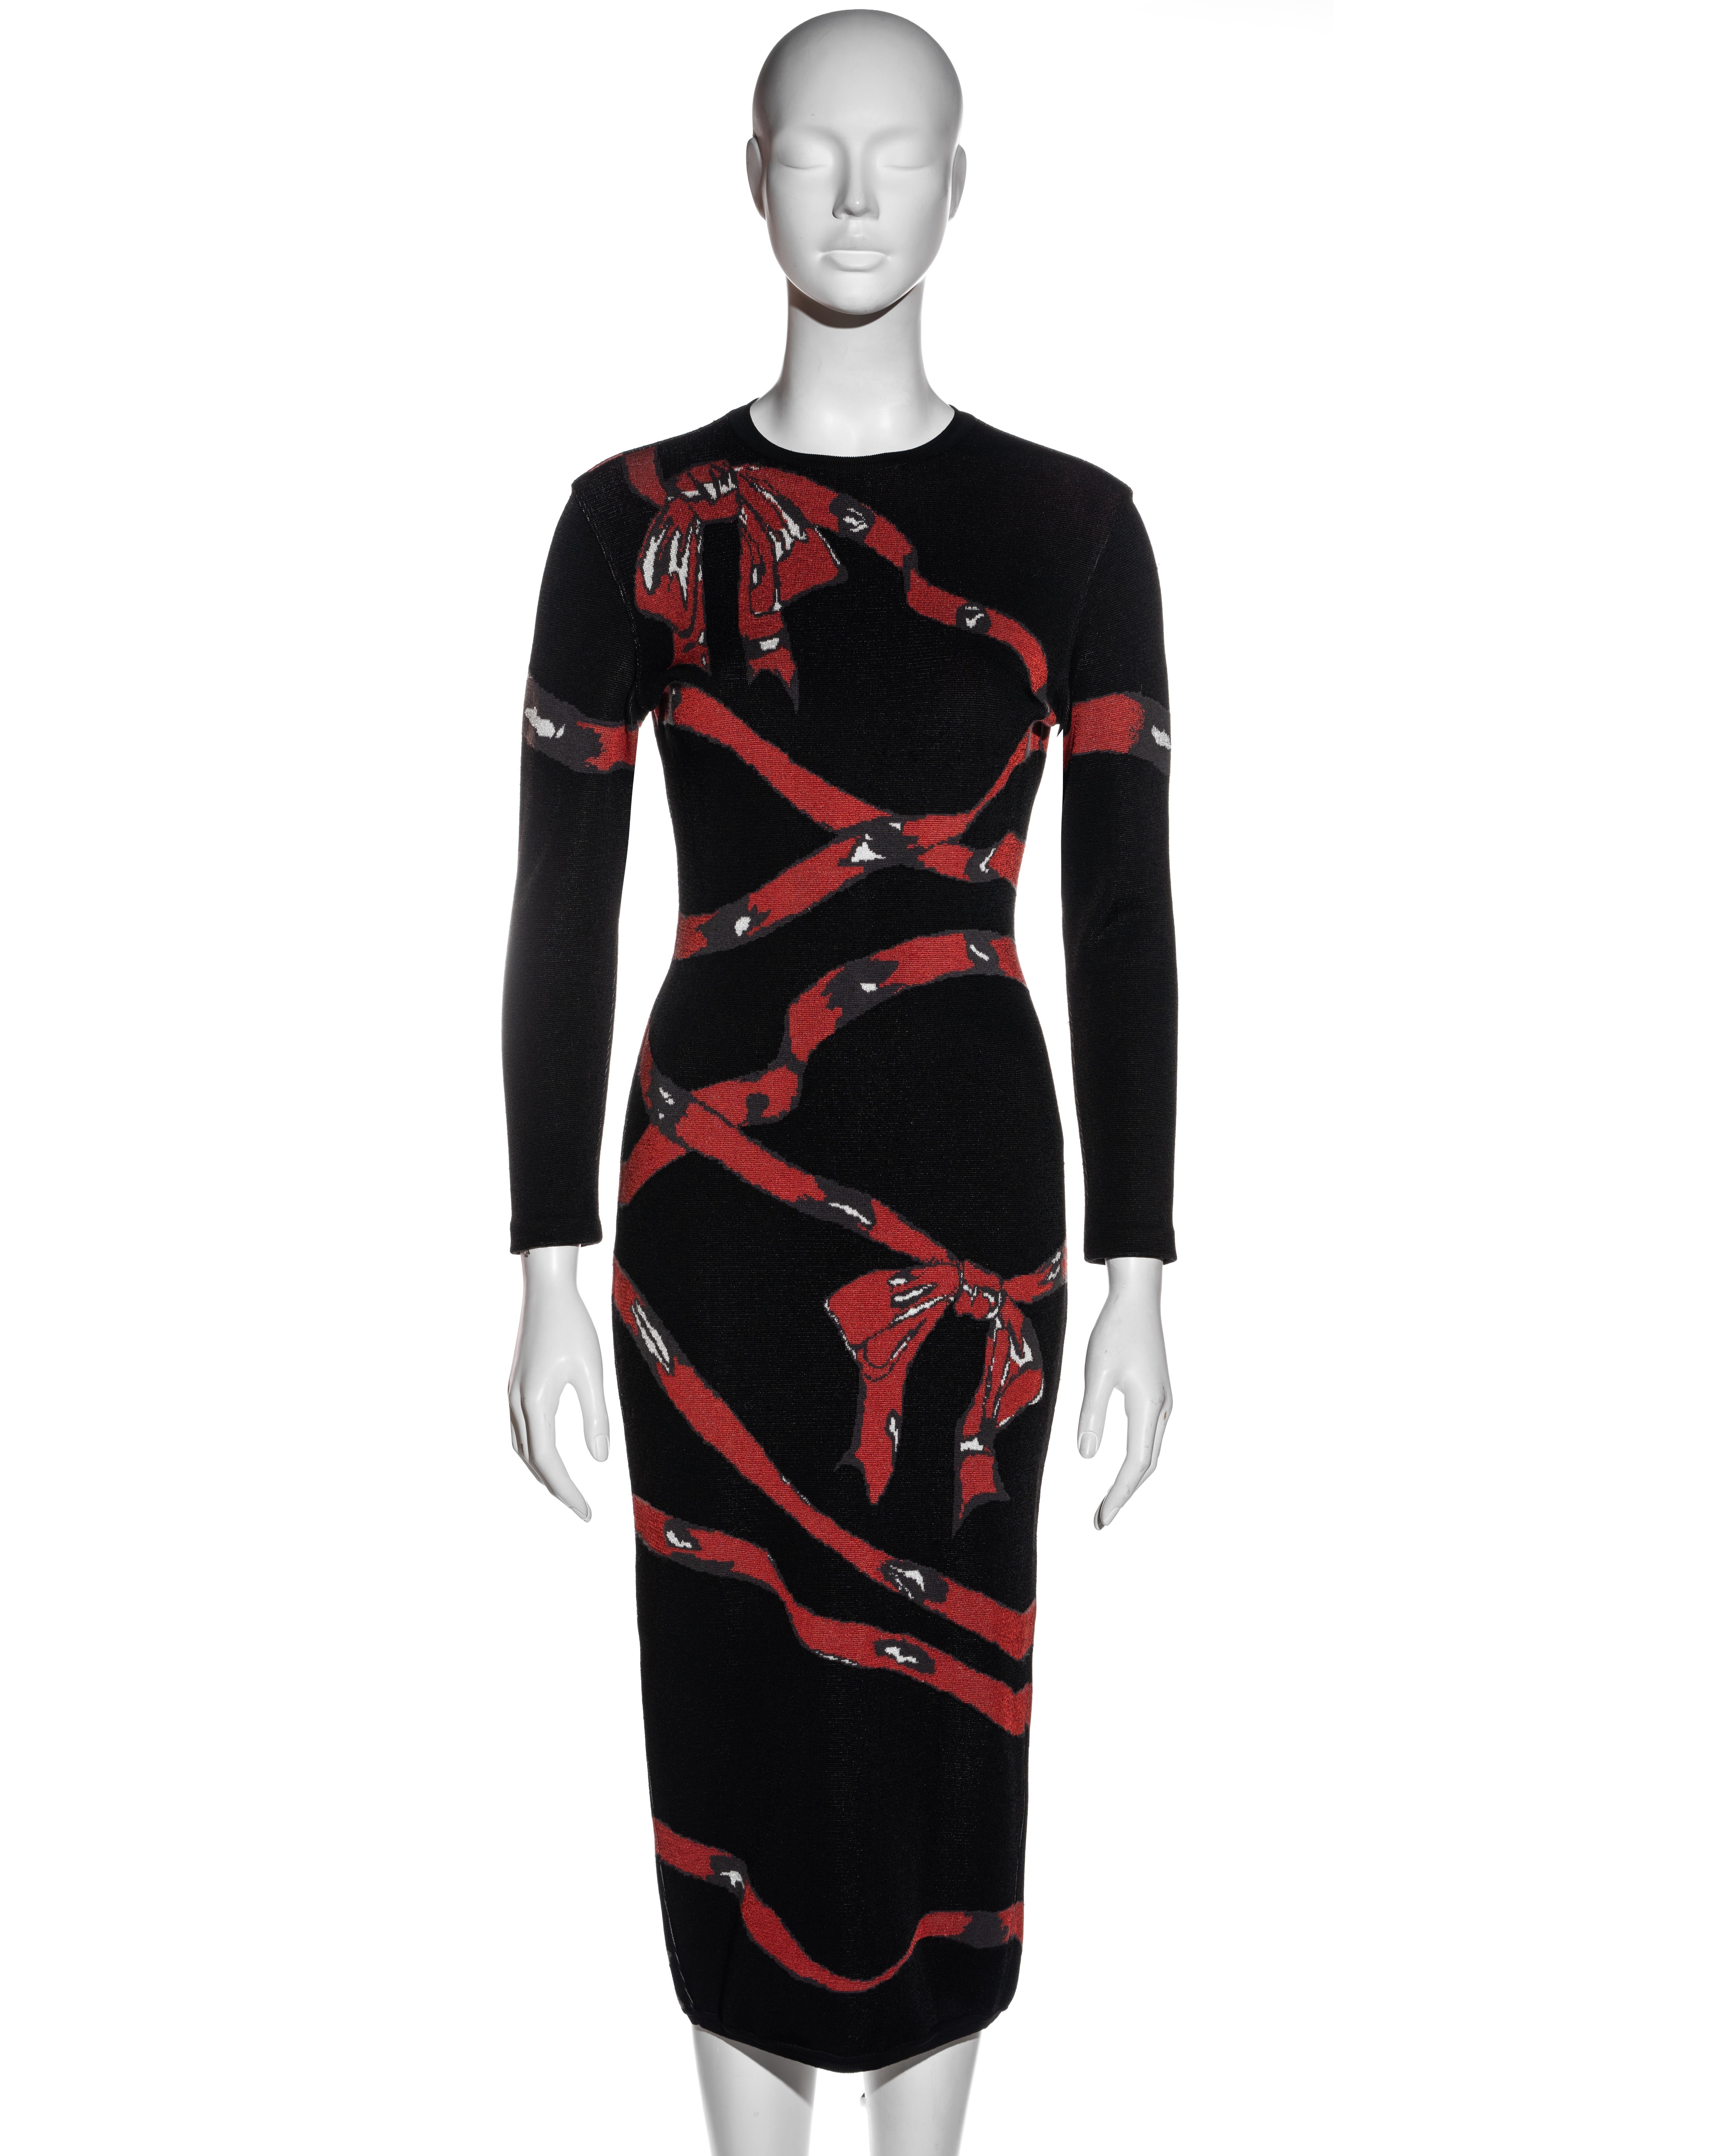 ▪ Azzedine Alaia black rayon knitted bodycon dress
▪ Red ribbon and bow graphic 
▪ Centre back leg slit with concealed zipper 
▪ Long sleeves 
▪ Calf length 
▪ Size Medium
▪ Fall-Winter 1992